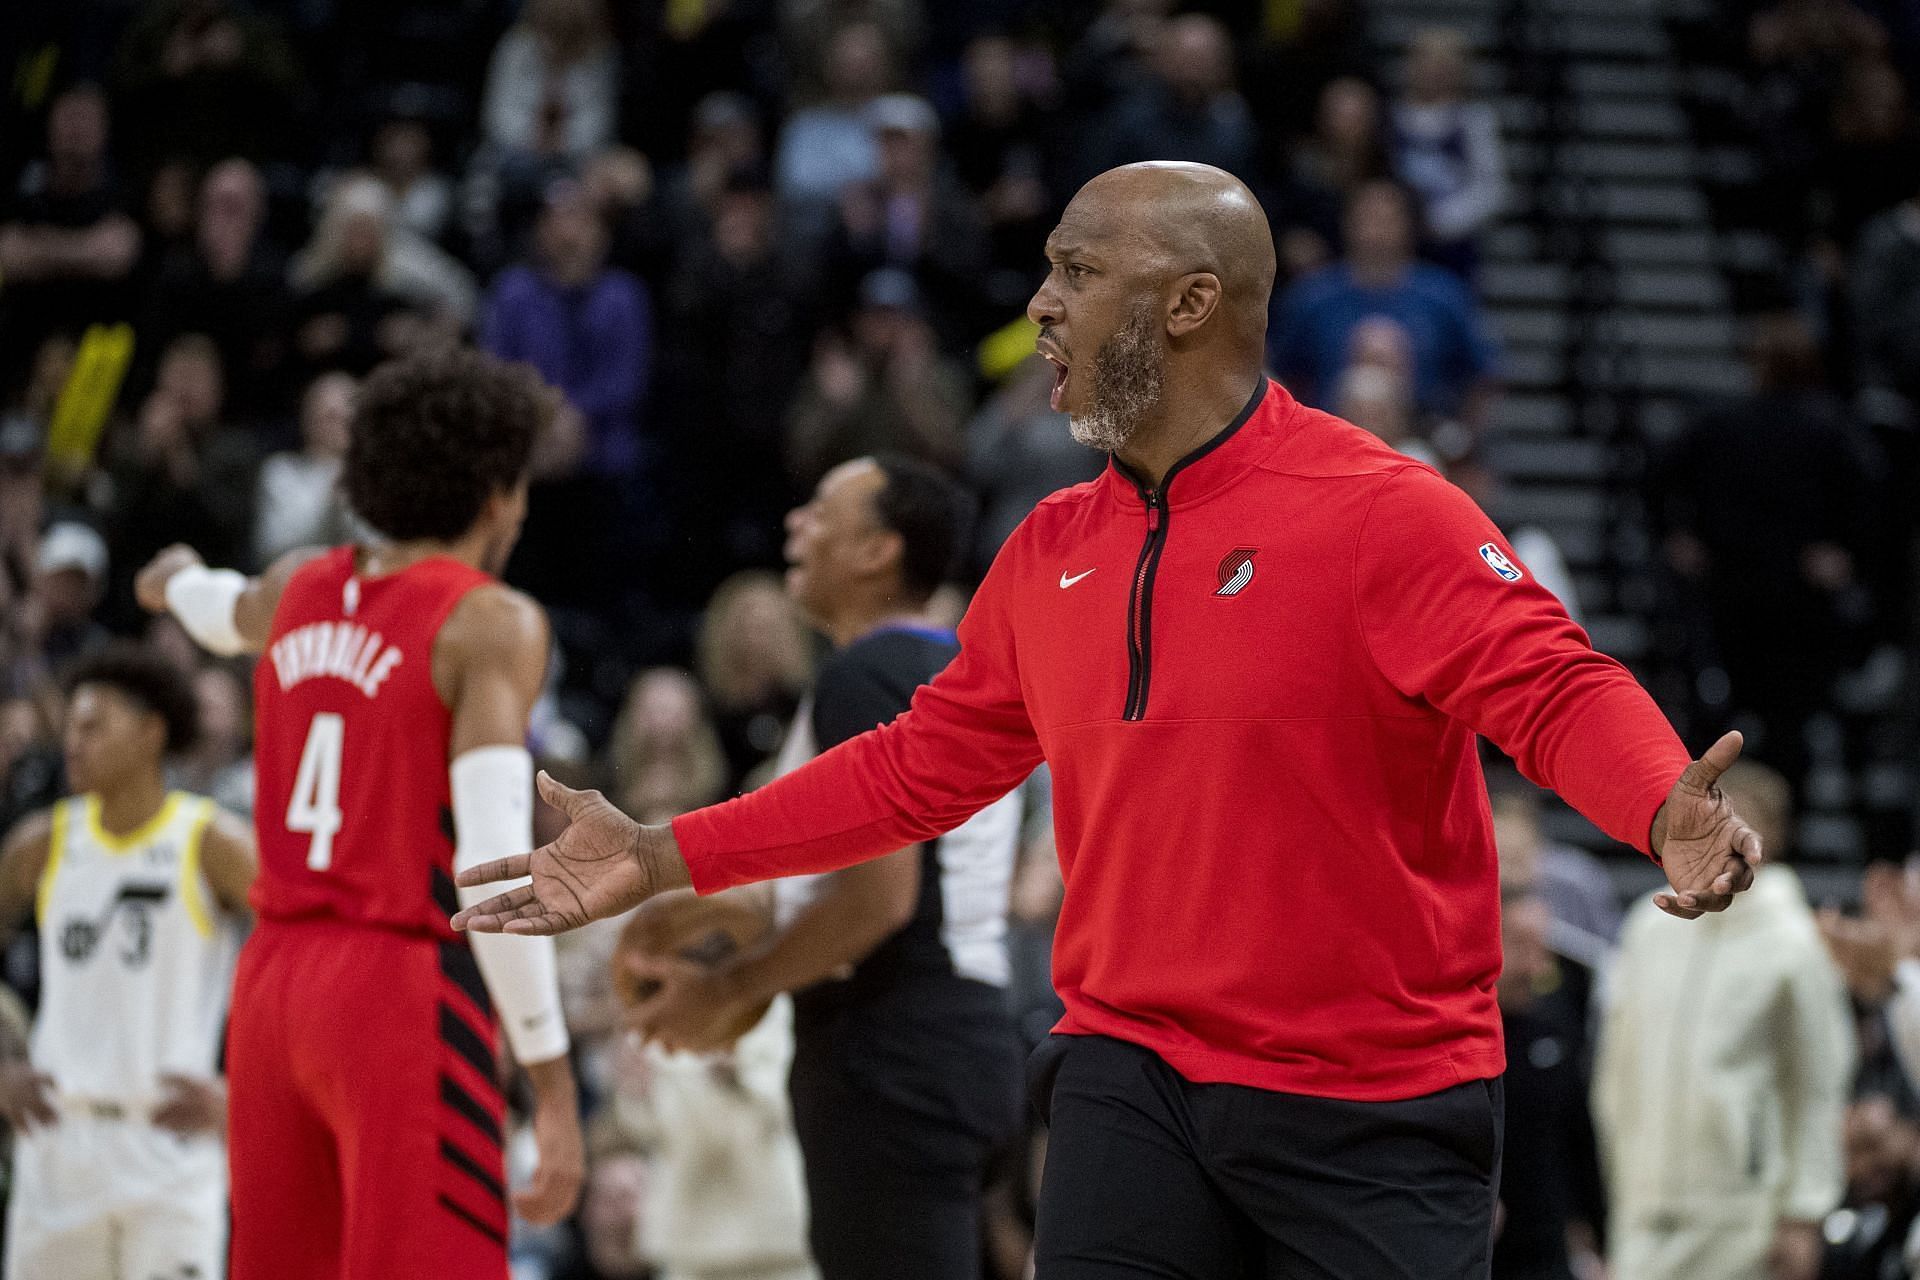 Chauncey Billups derides Blazers players for lack of seriousness